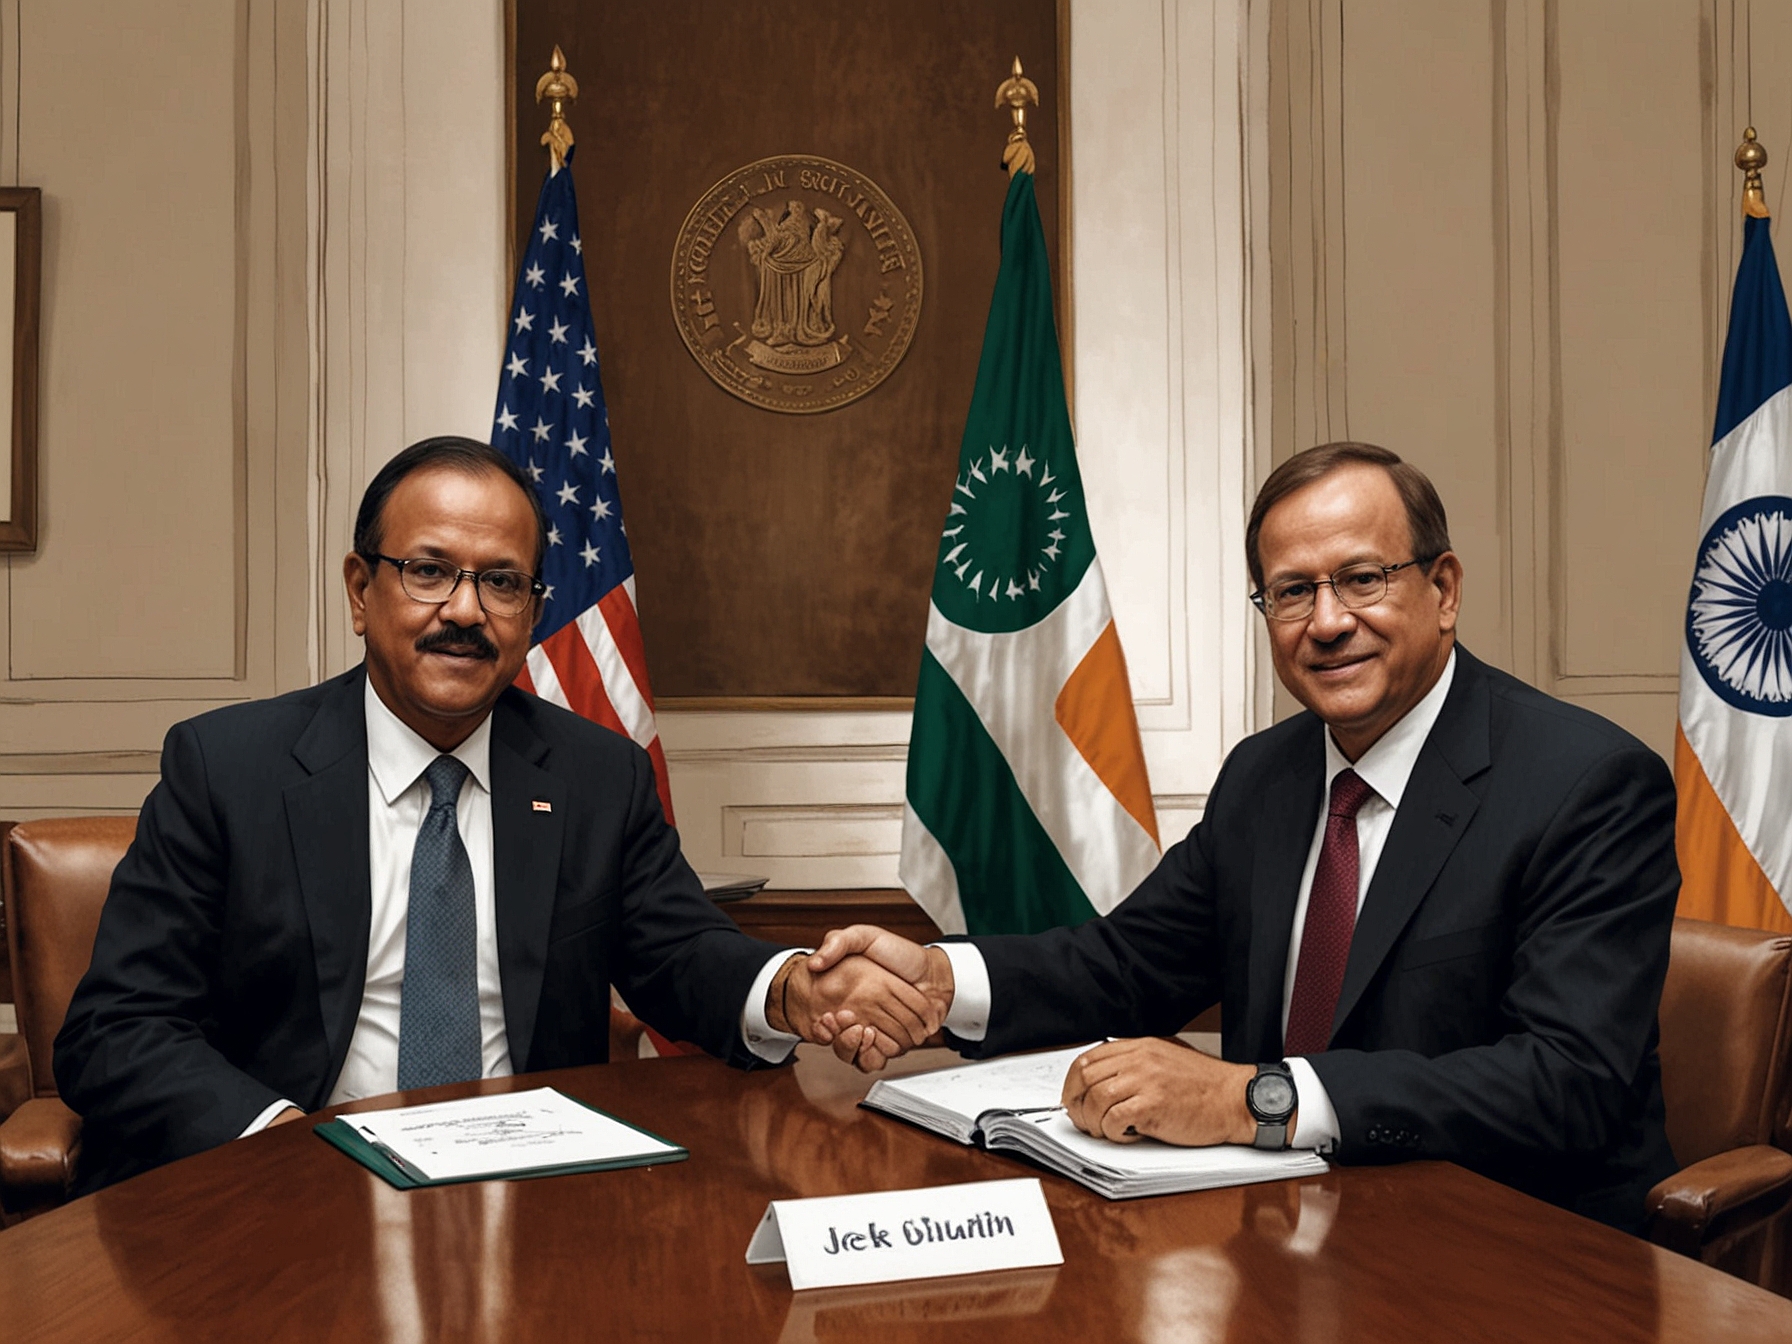 Ajit Doval and Jake Sullivan during their meeting in New Delhi, discussing collaborative efforts under the iCET initiative to advance technology and security ties between India and the US.